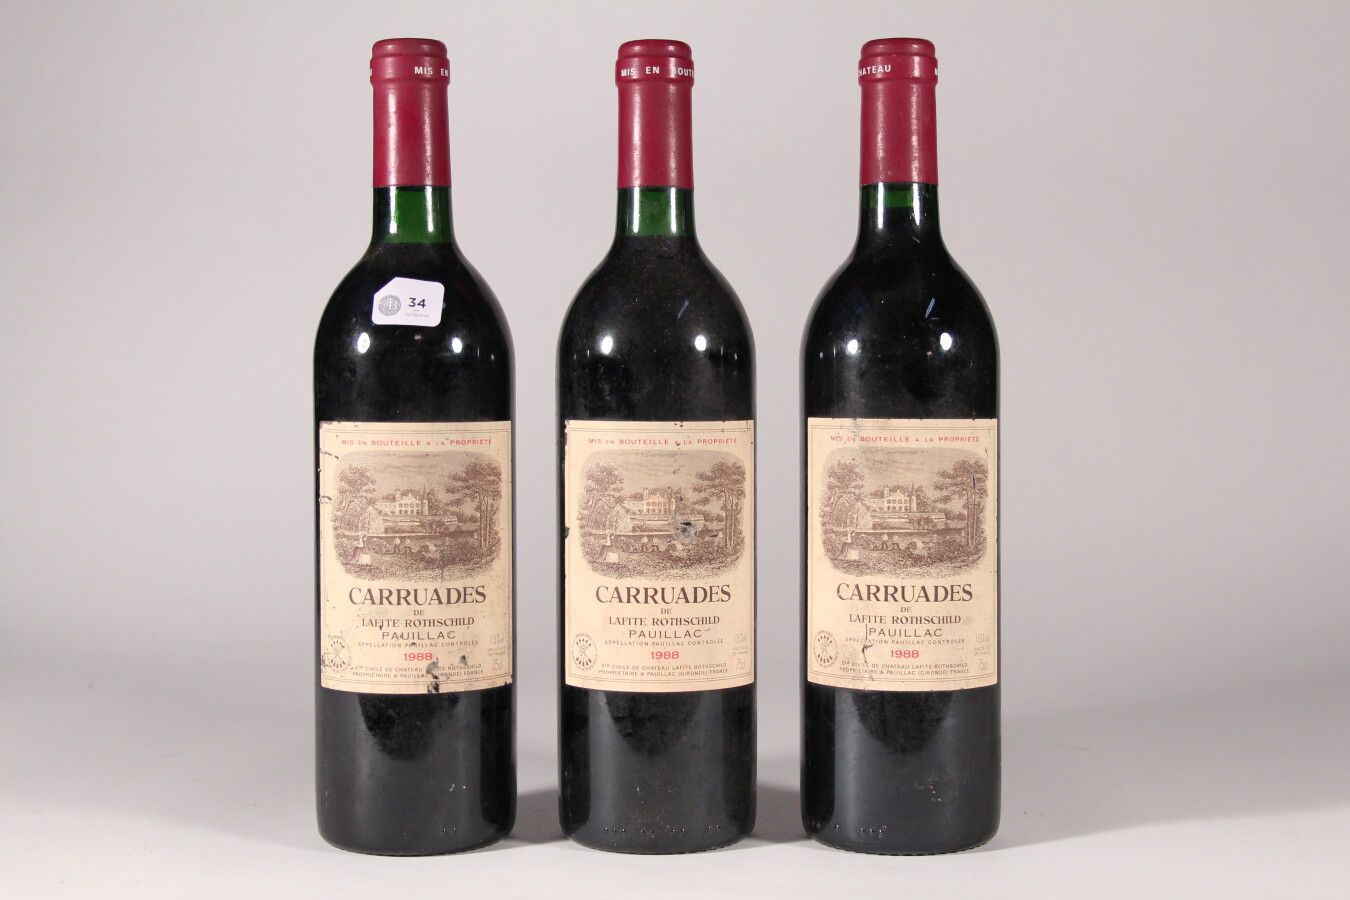 Null 1988 - Carruades Lafitte Rothschild

Pauillac Red - 3 bottles